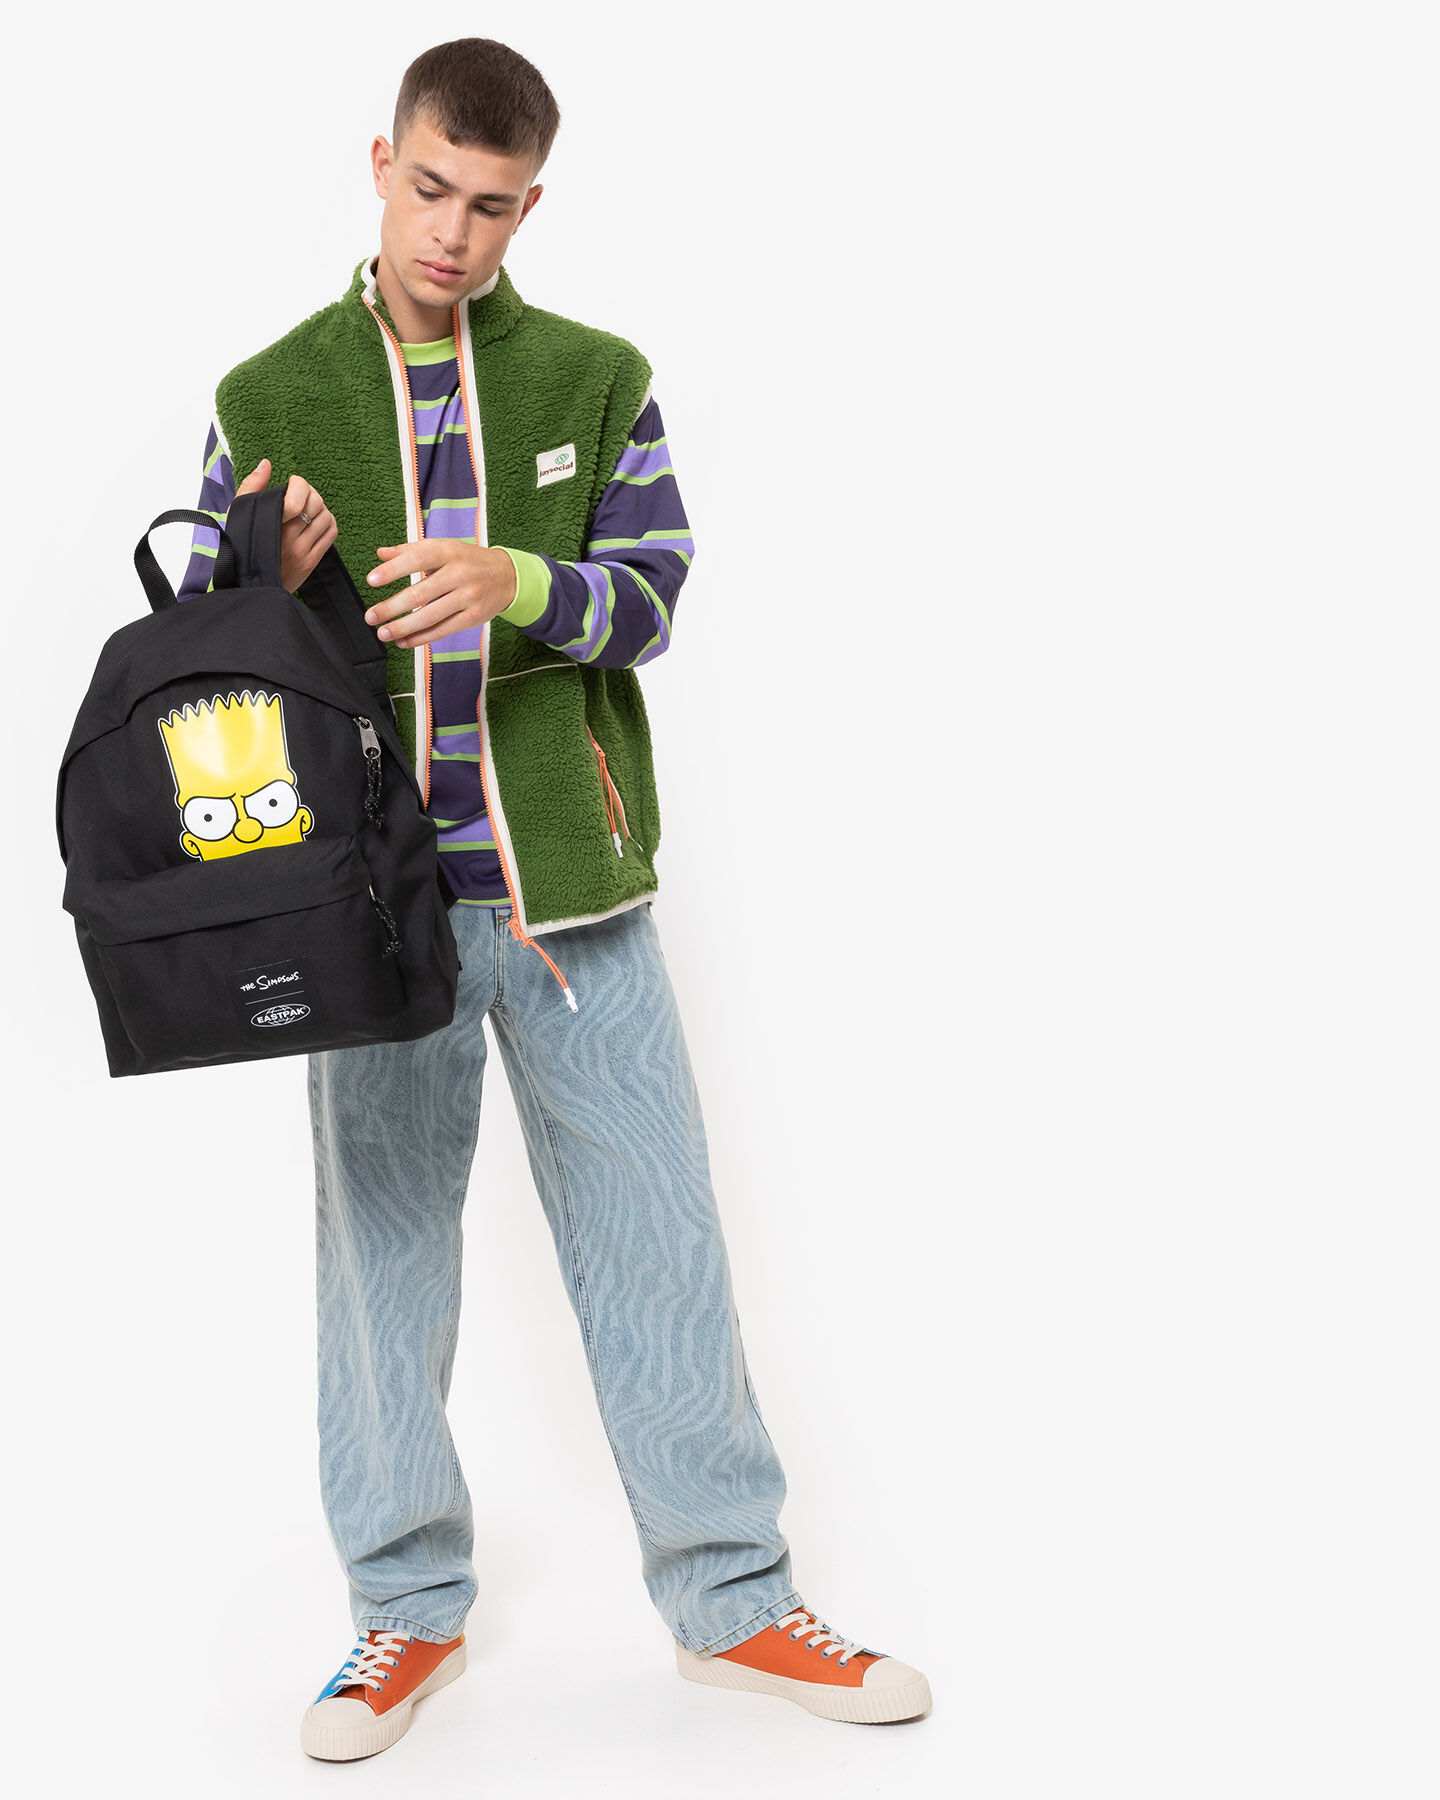  Zaino EASTPAK PADDED THE SIMPSONS BART  S5550523|7A3|OS scatto 2